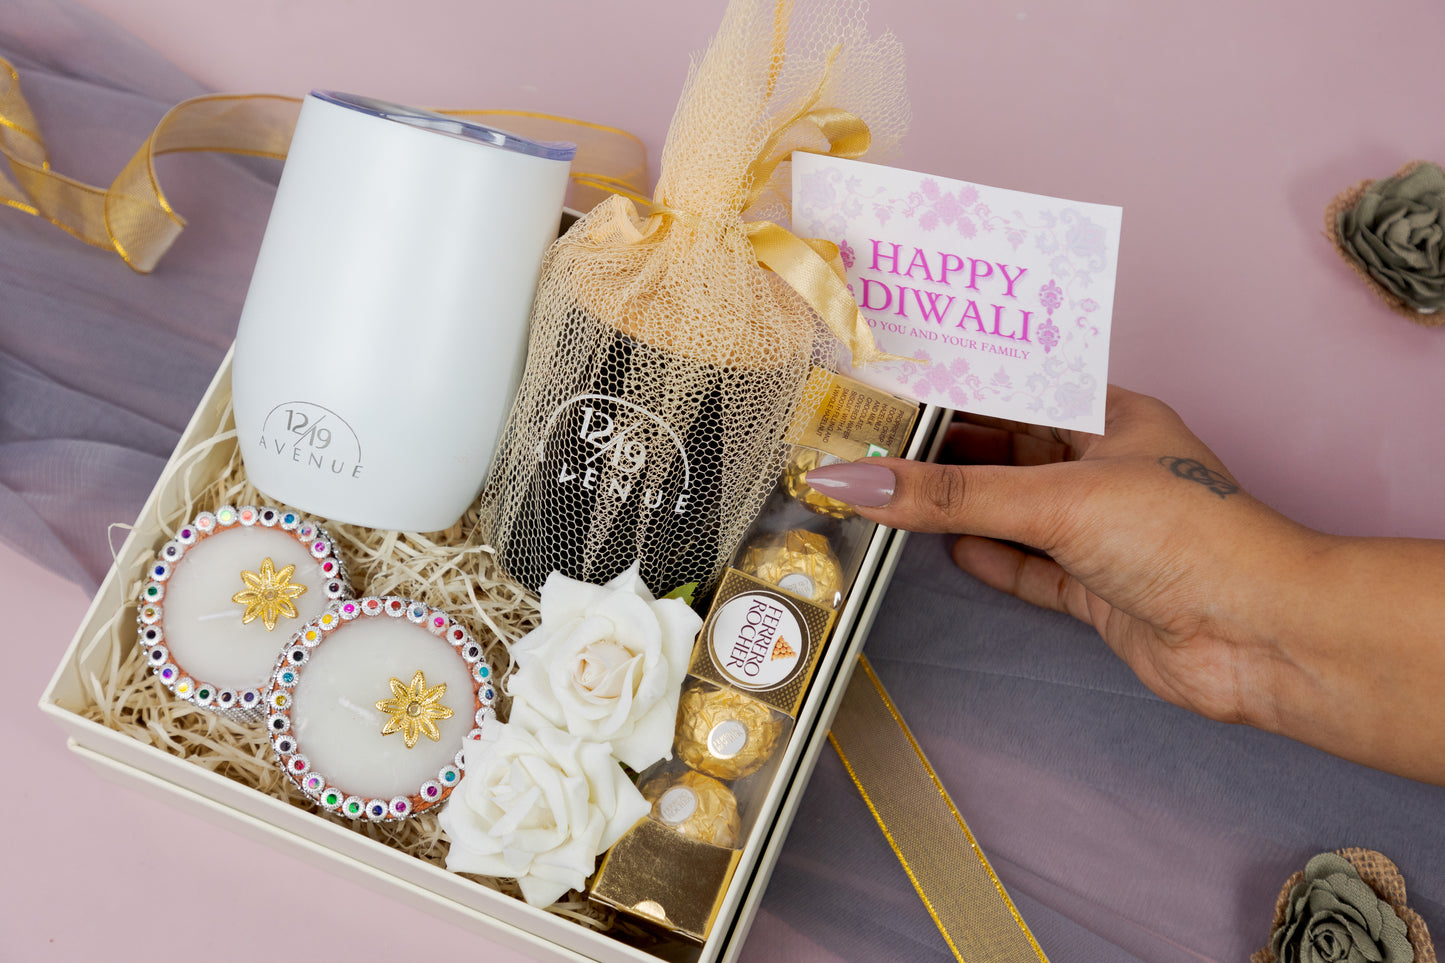 The Coffee Conversations Personalized Gifting Hamper